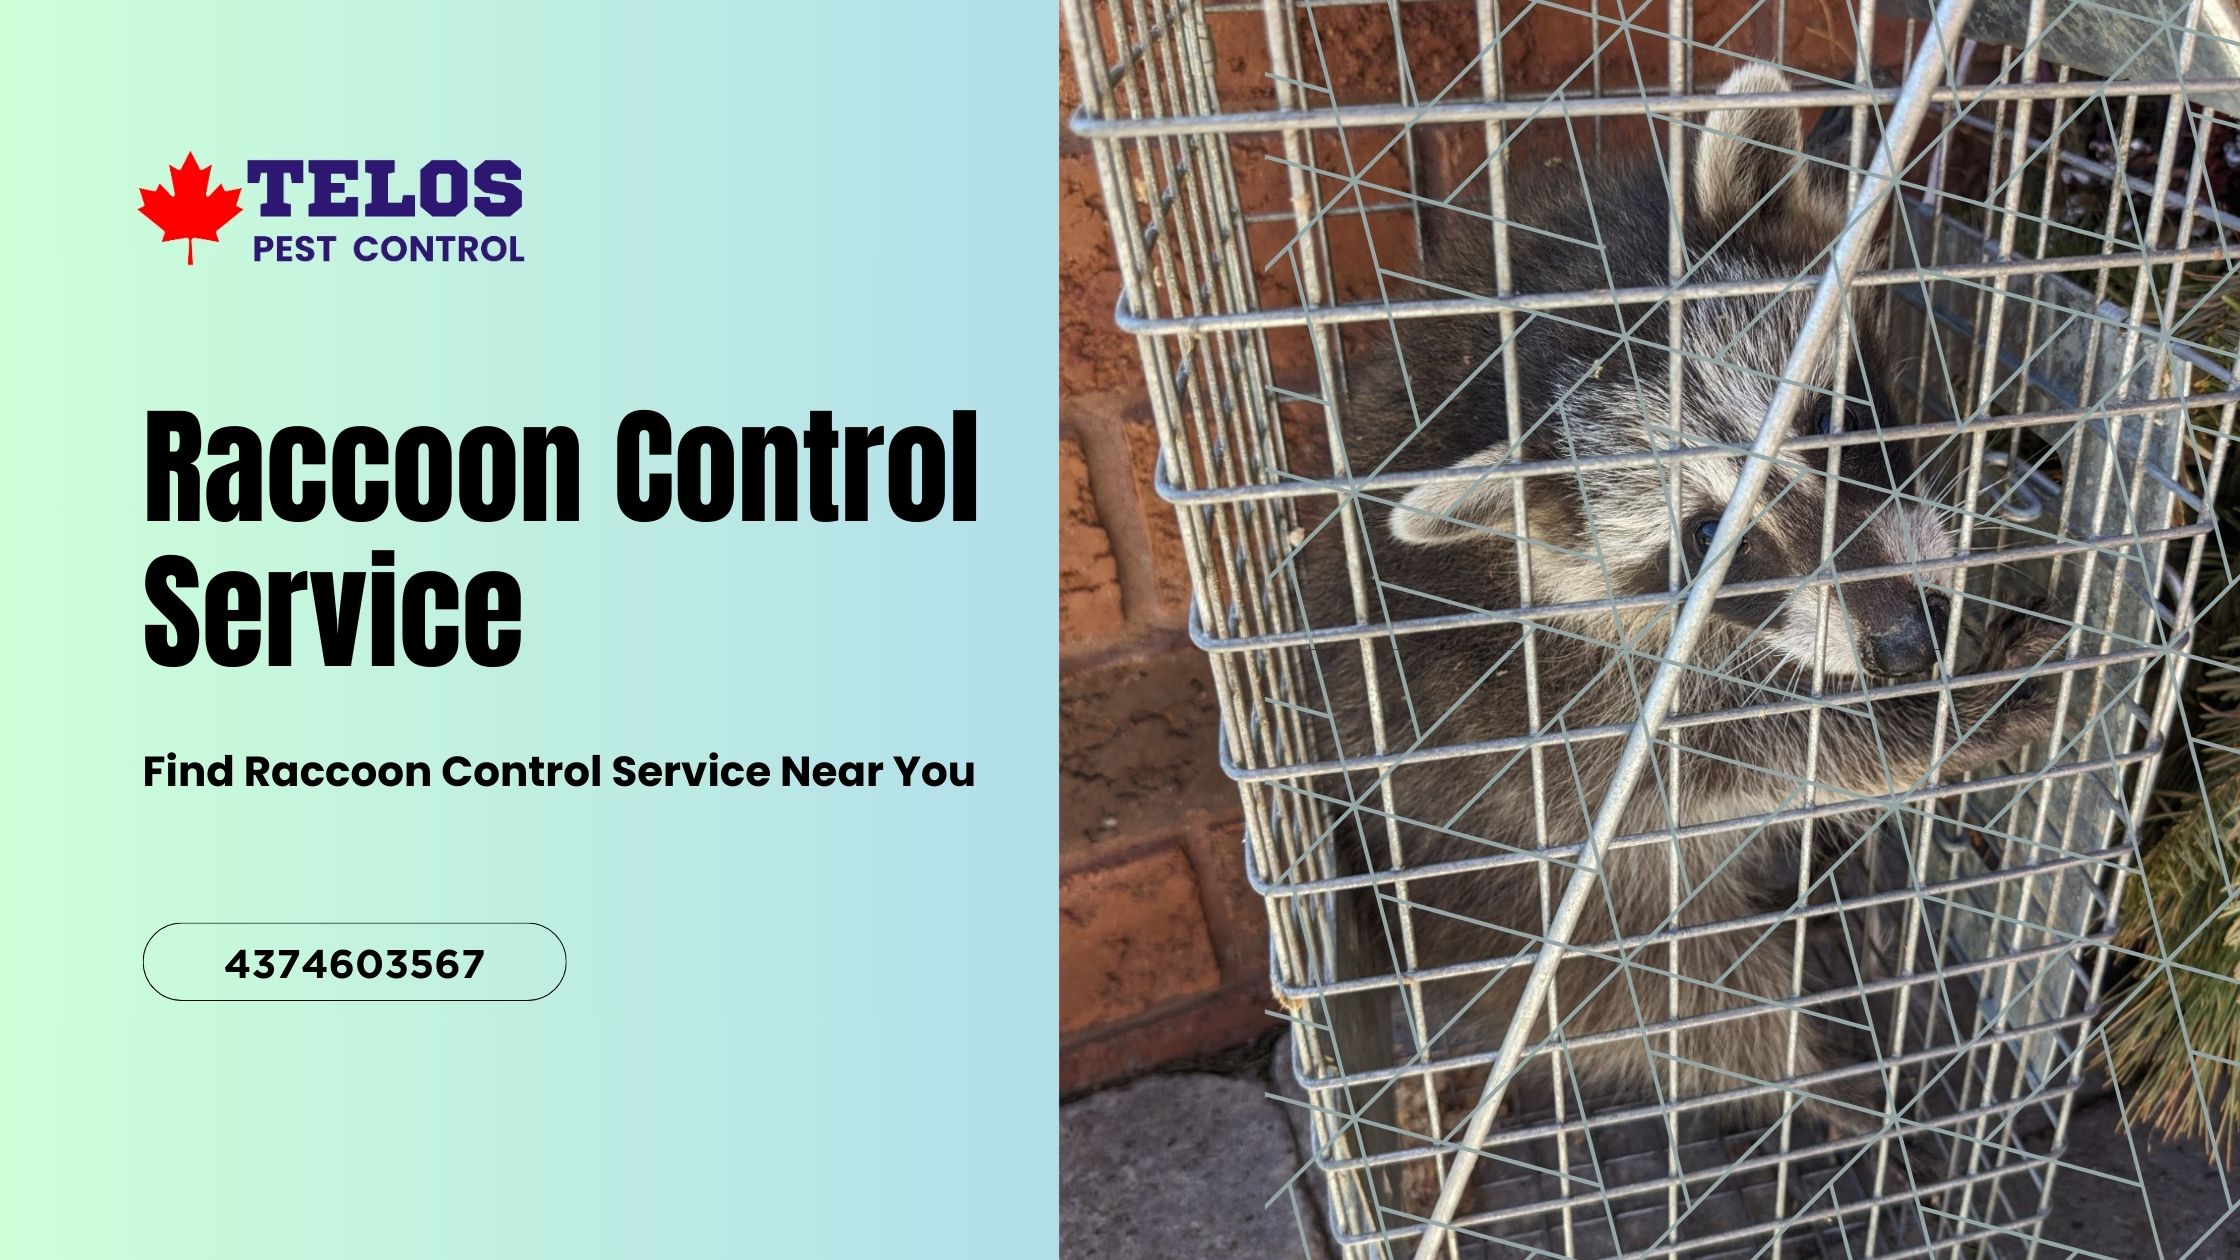 How to Find Raccoon Control Service in Toronto